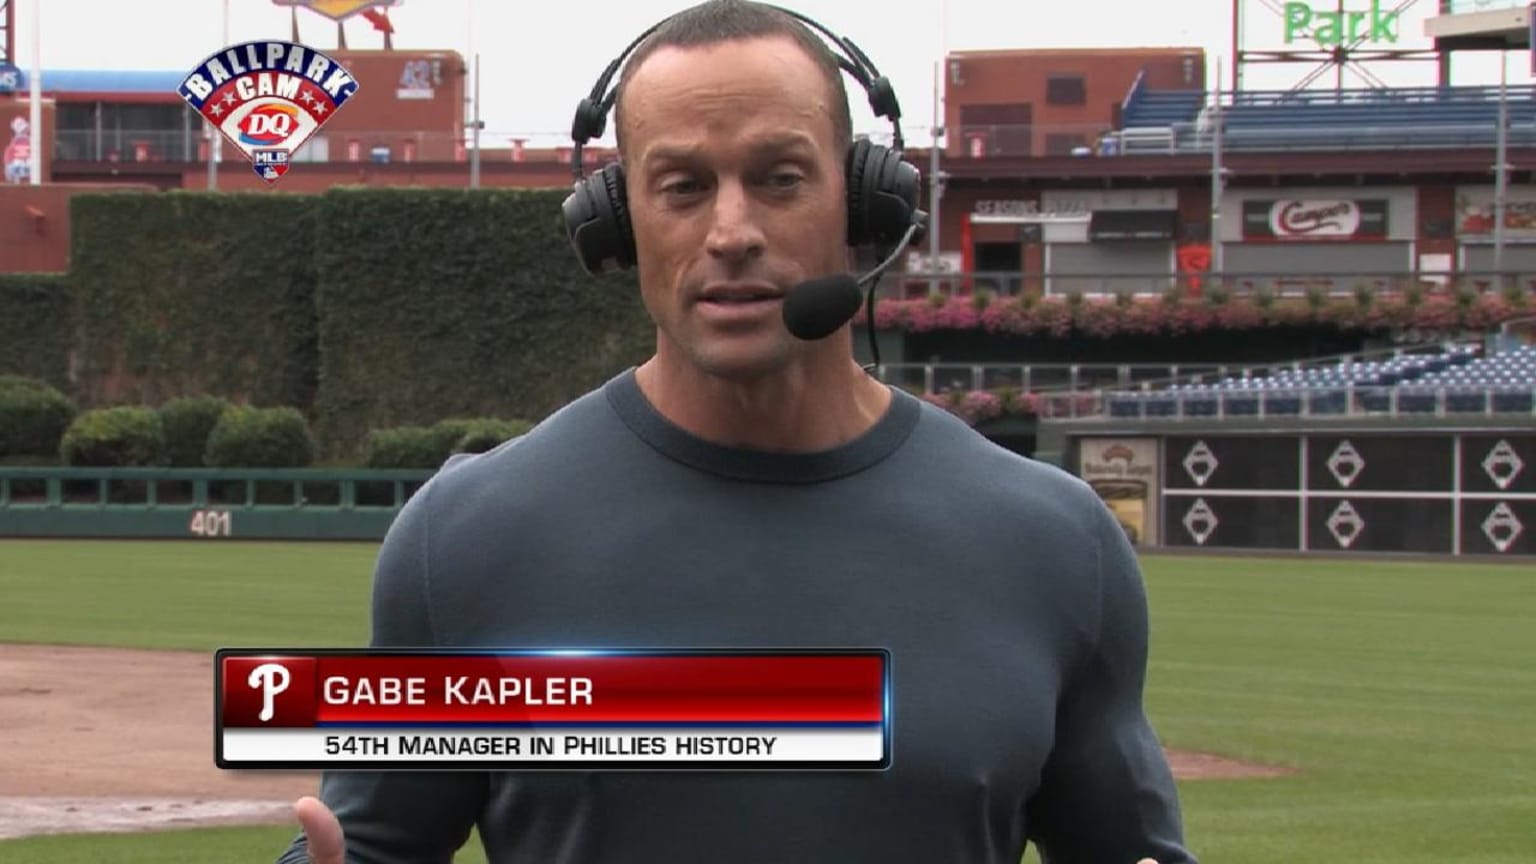 Gabe Kapler joins MLB Now to discuss becoming the 54th manager in Philadelp...